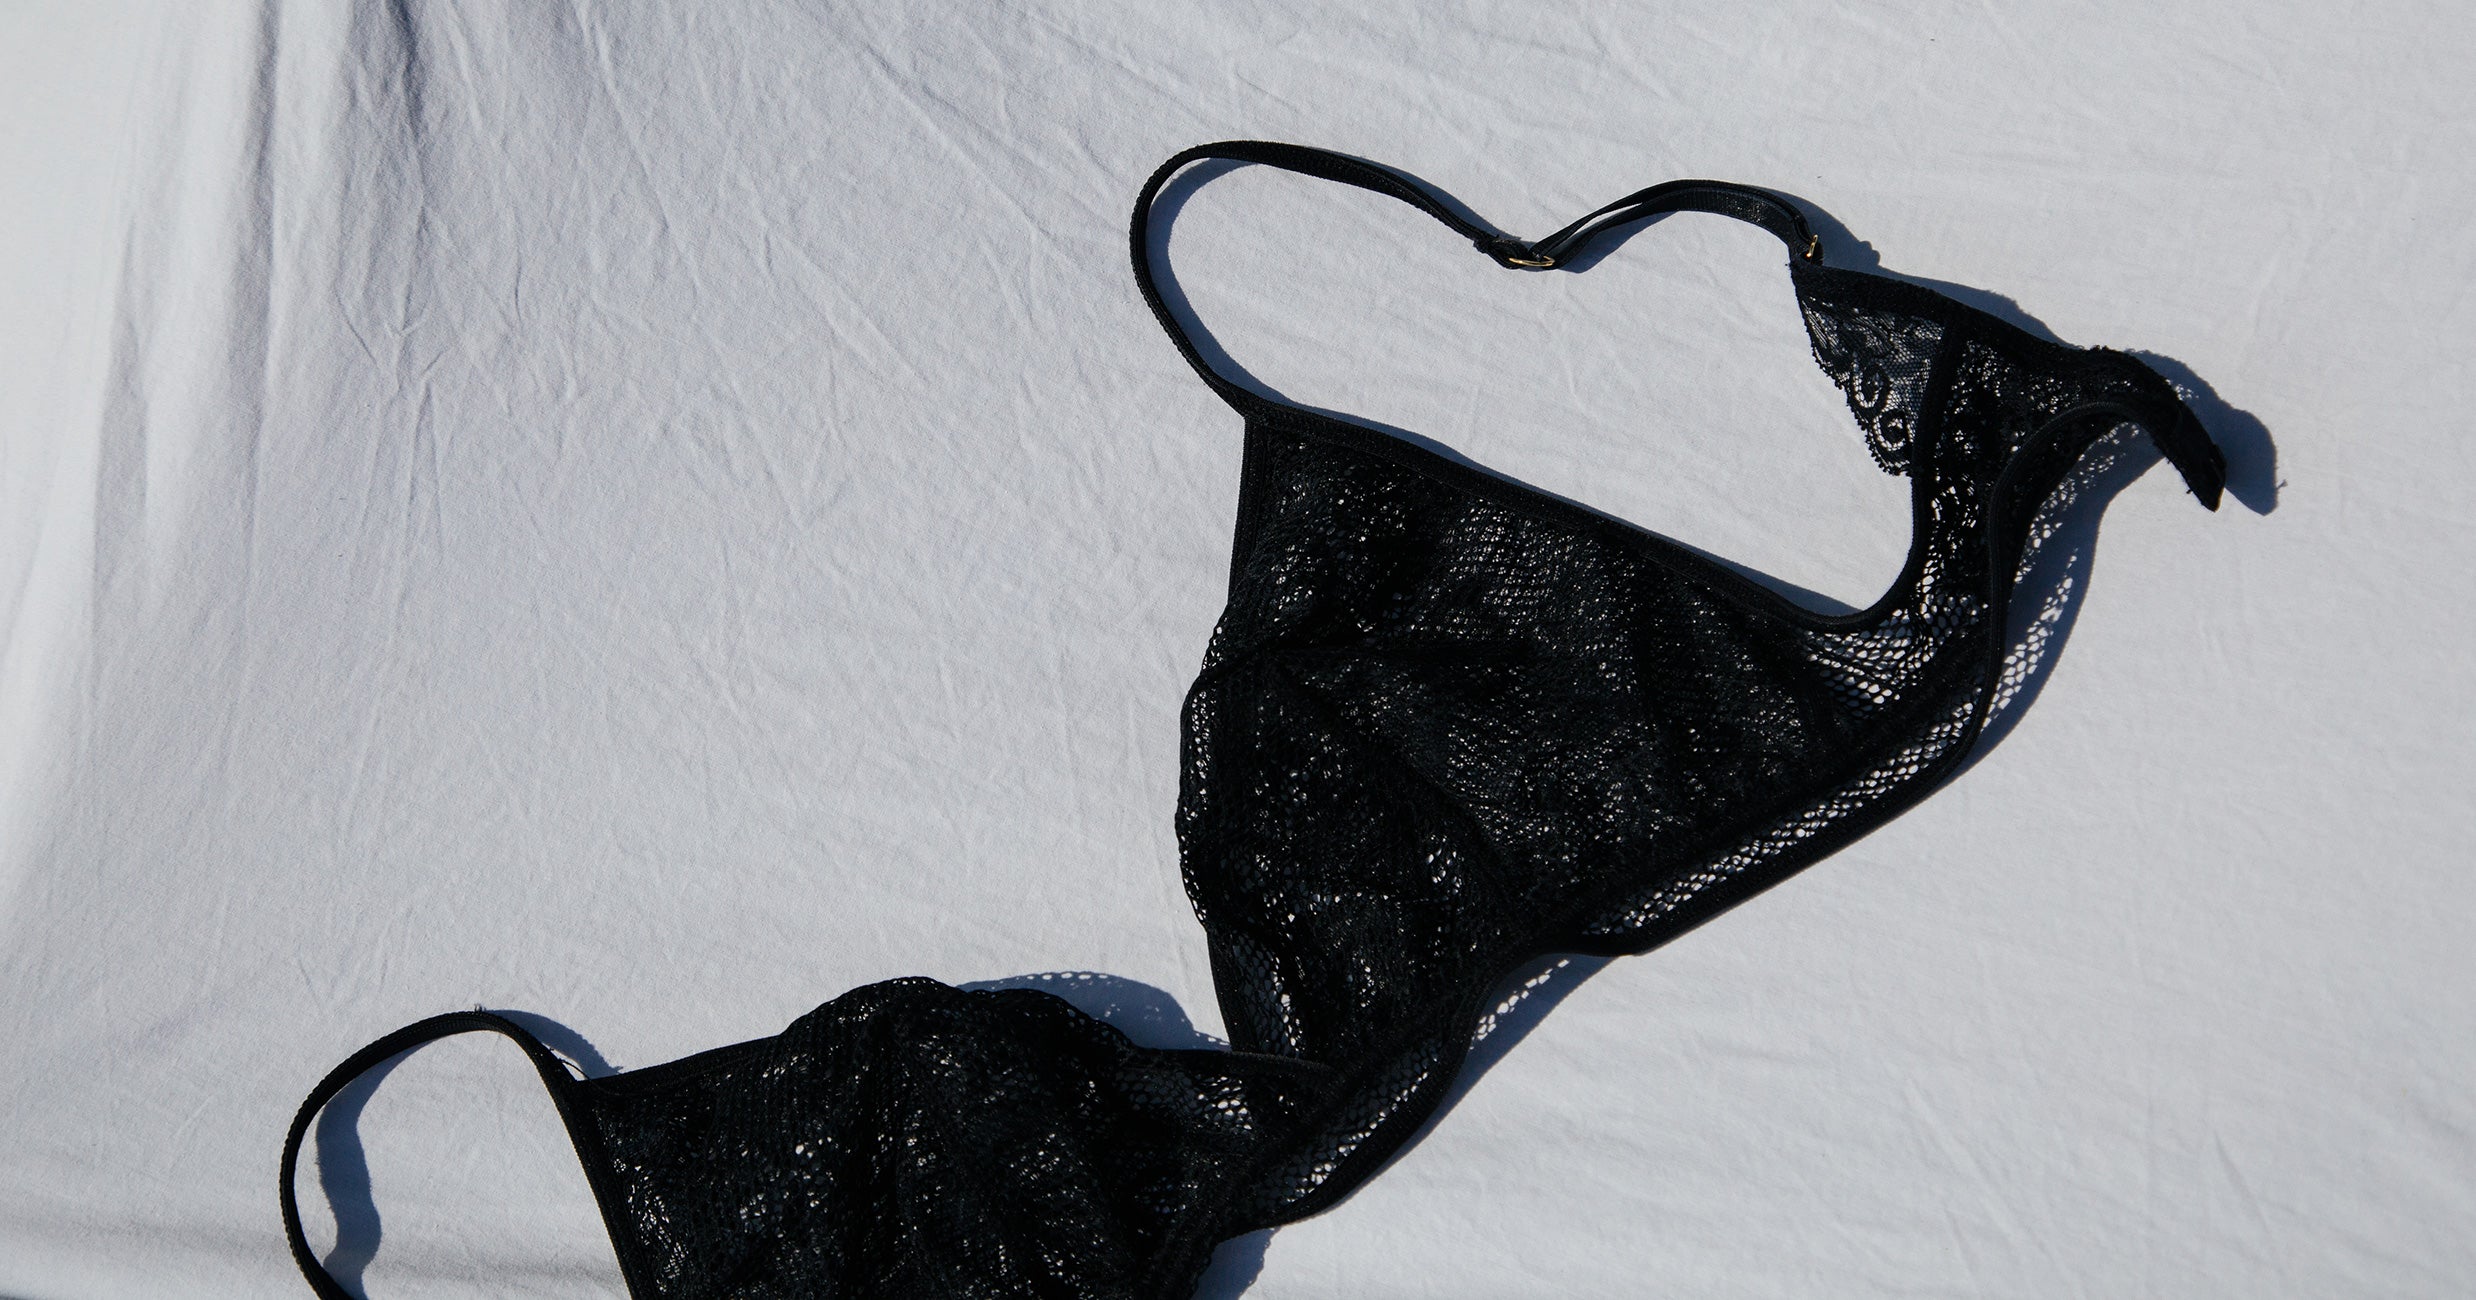 Do you purchase bras and panties for your girlfriend or wife? - Quora